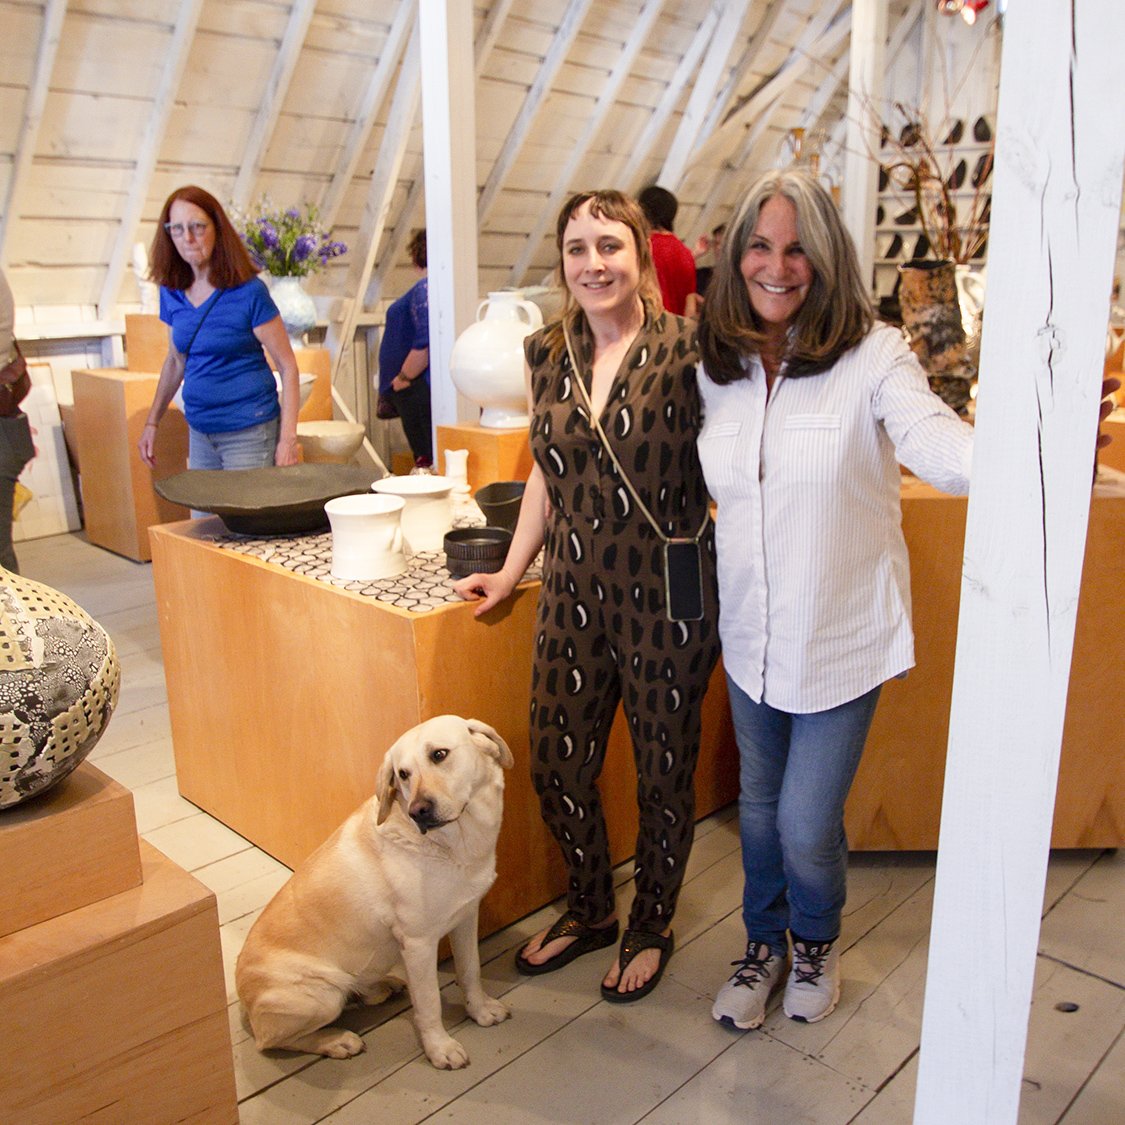 Original host potter Connee Mayeron (right) with her host protege Ani Kasten in their Barn Gallery, 2022. Photo credit: Amber White.